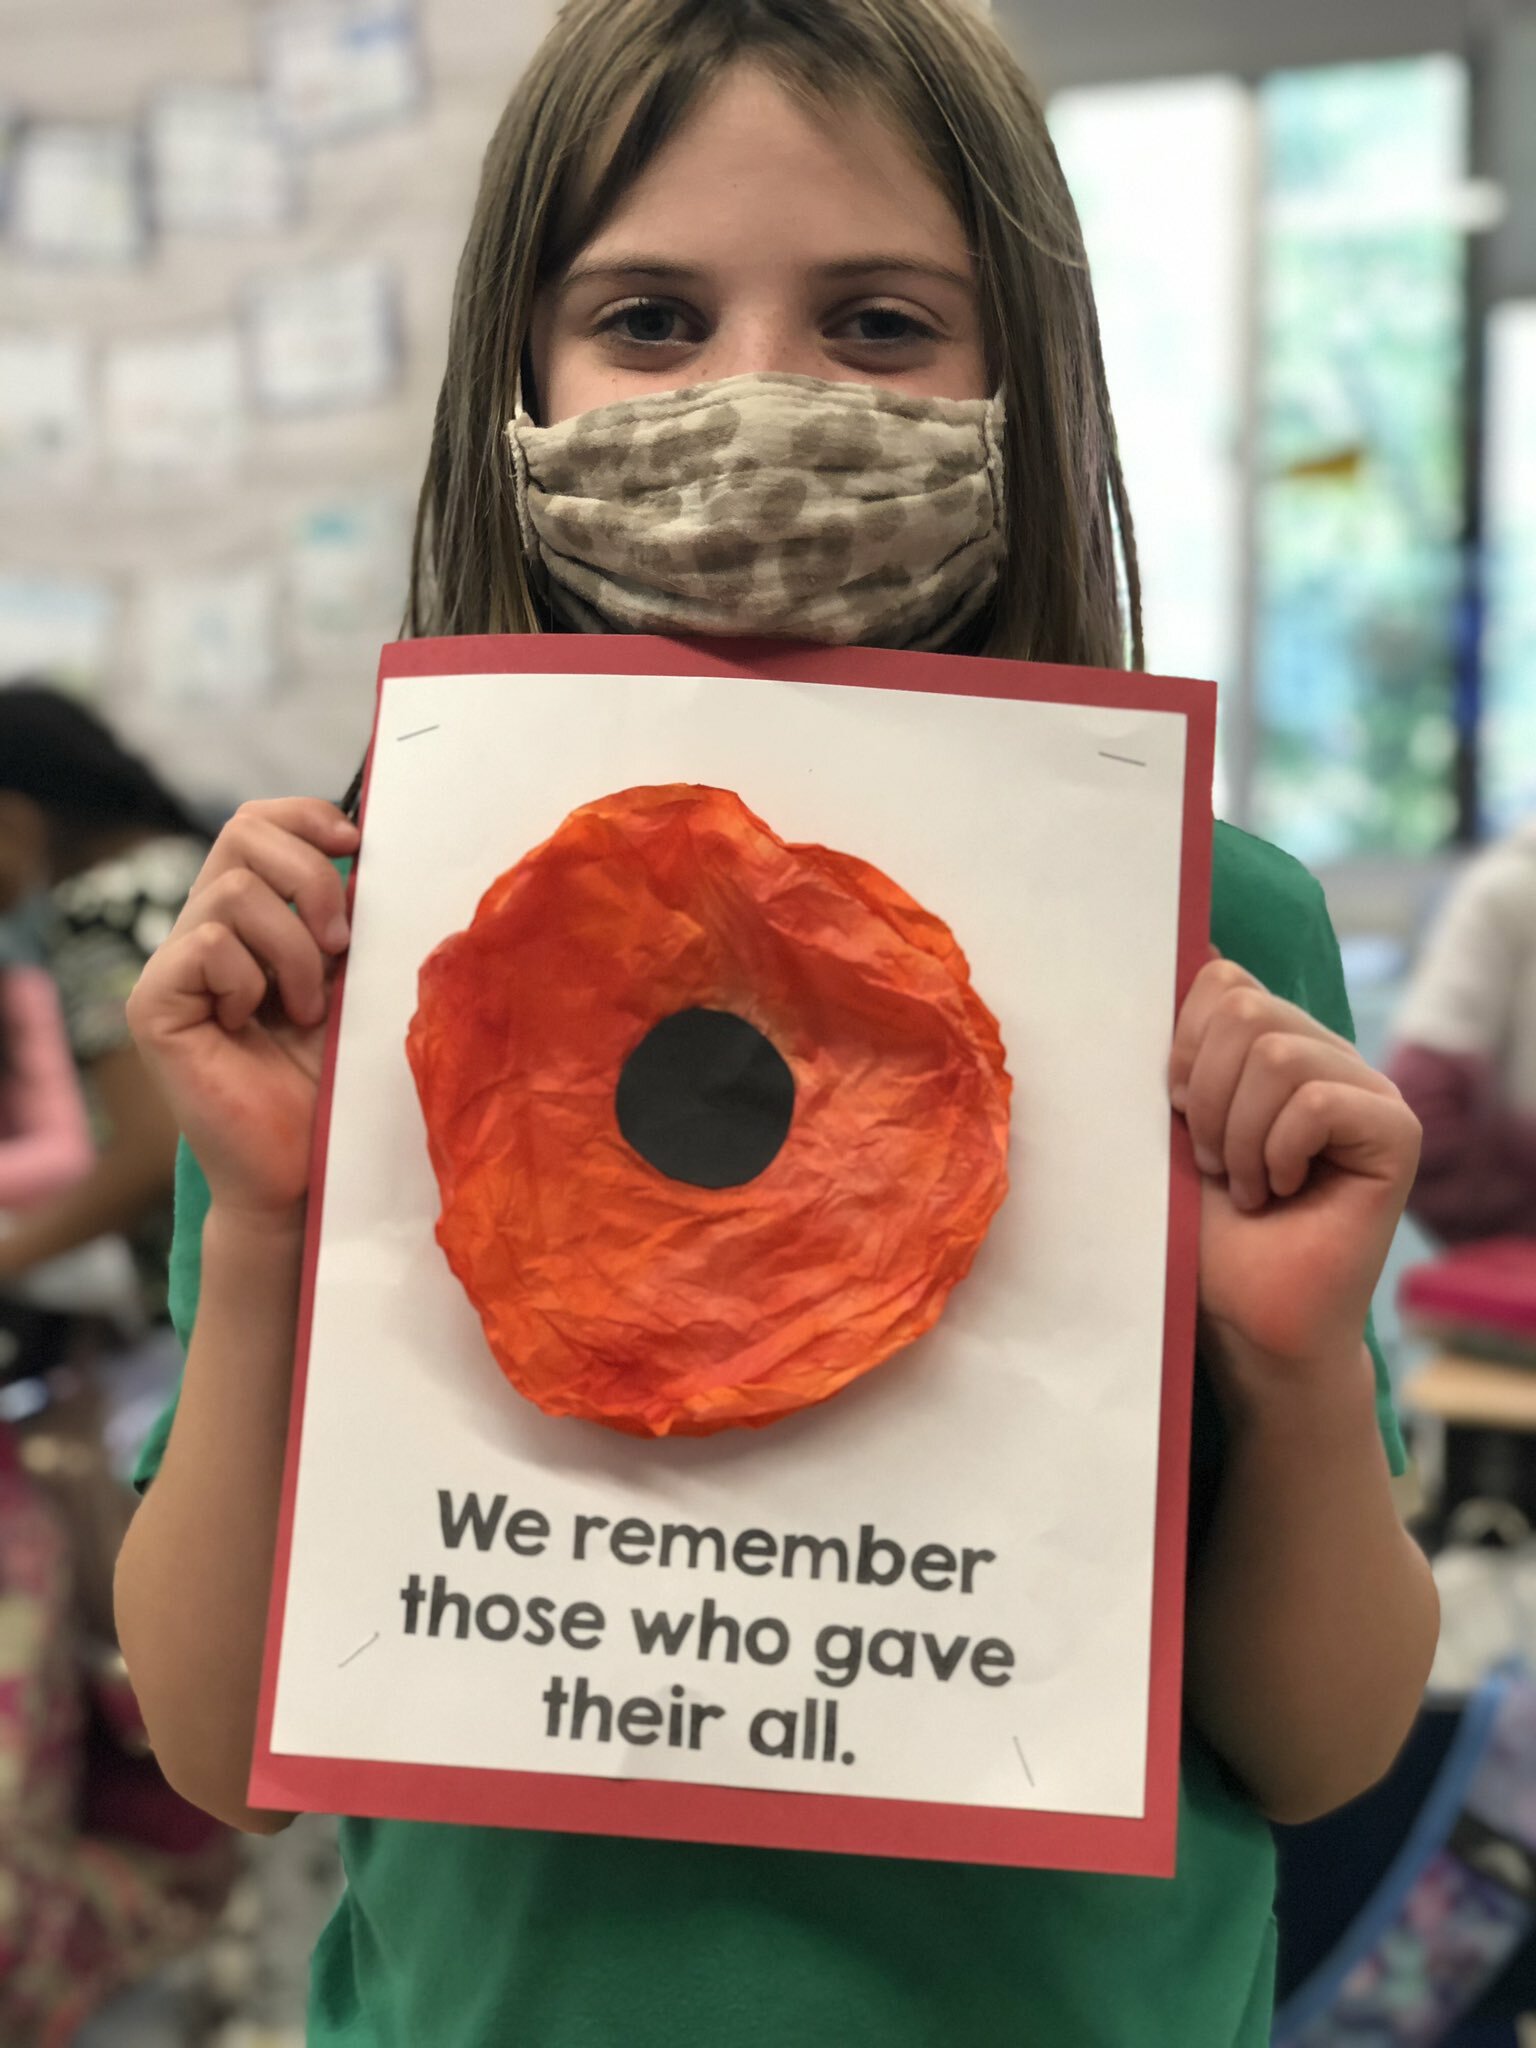 Hampton Bays Elementary School students recently learned more about Memorial Day and honoring those who served. In addition to the lessons, Erin McDermott’s second grade class made red paper poppies, while Lauren Mikelinich’s first graders designed red, white and blue paper plate wreaths. Photo courtesy of the Hampton Bays Union Free School District